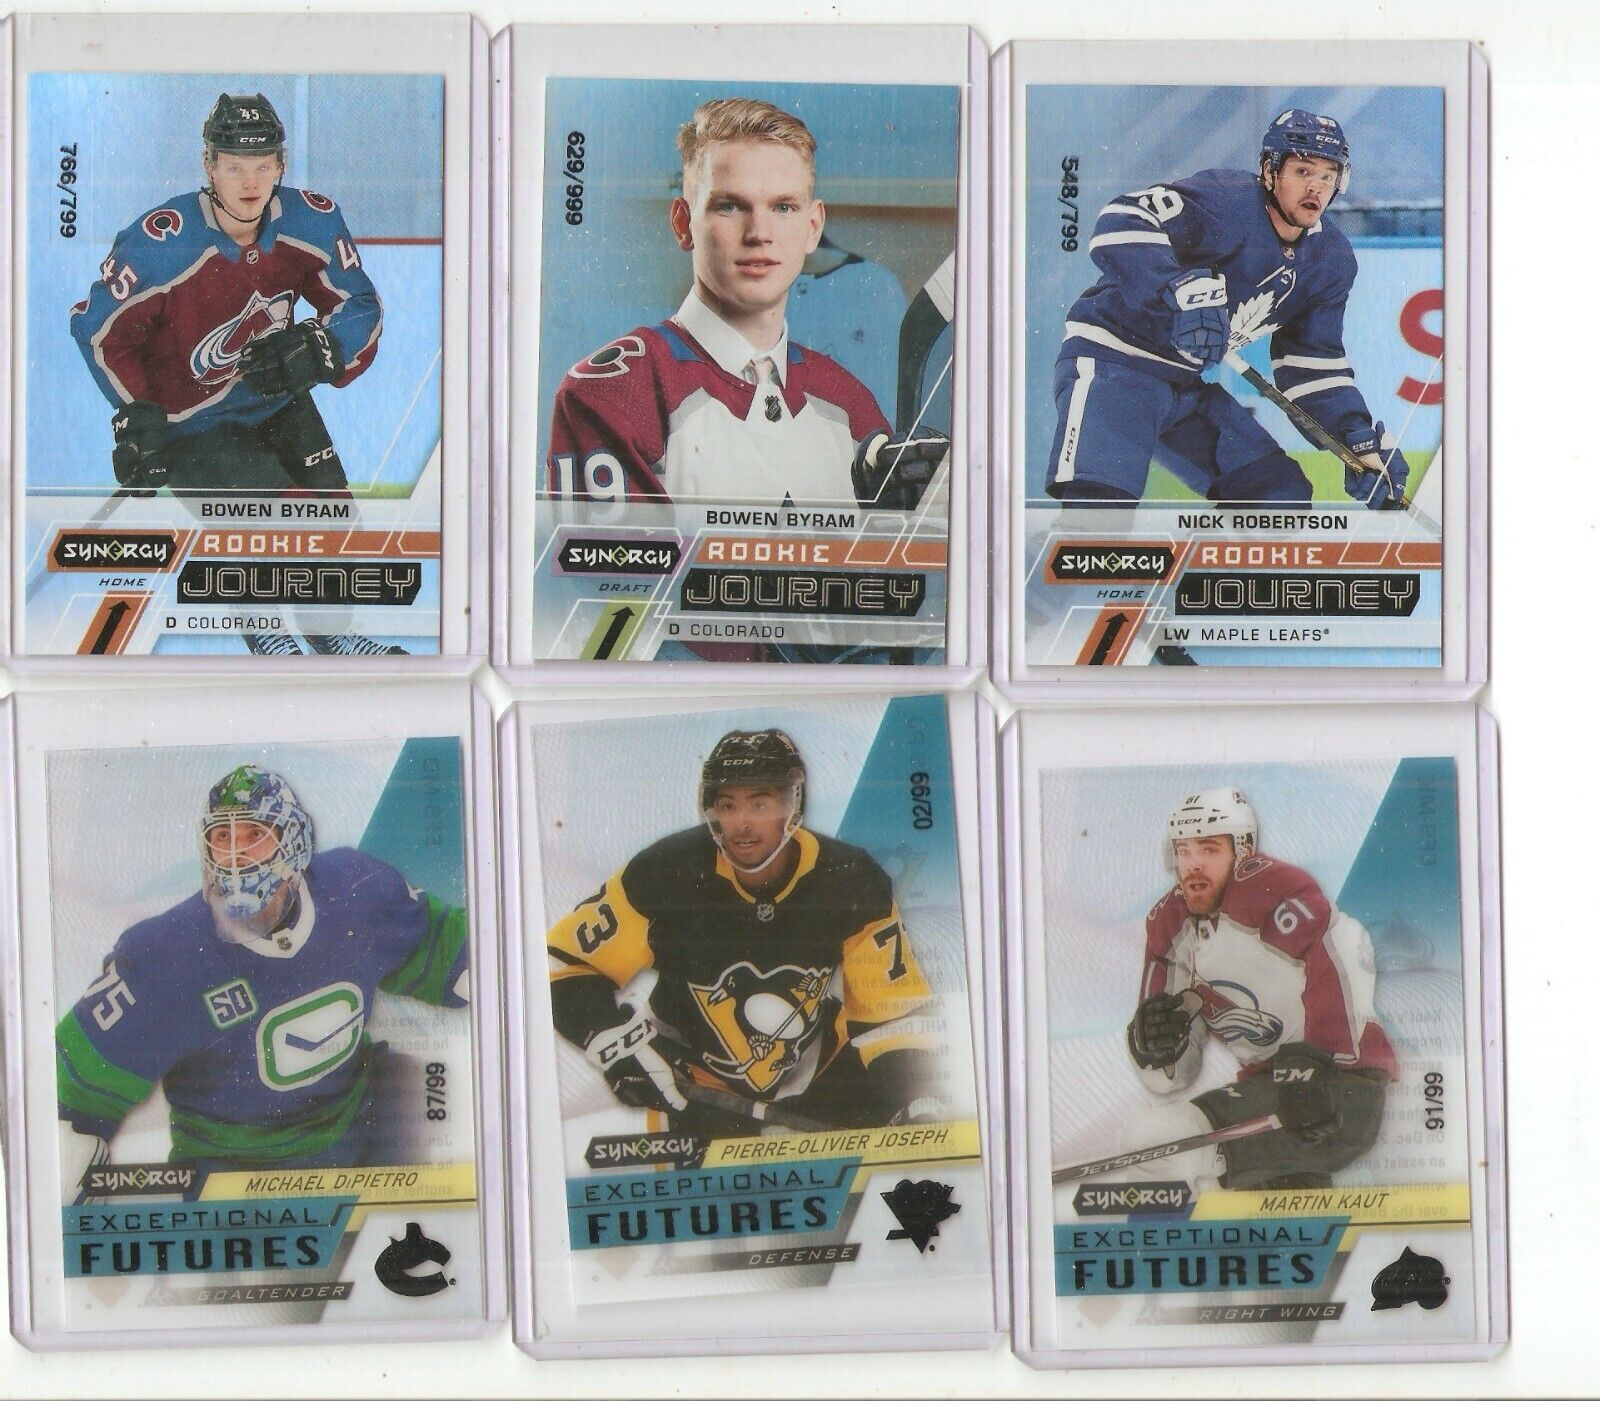 20-21 UD Synergy Rookie Journey Nick Robertson/799